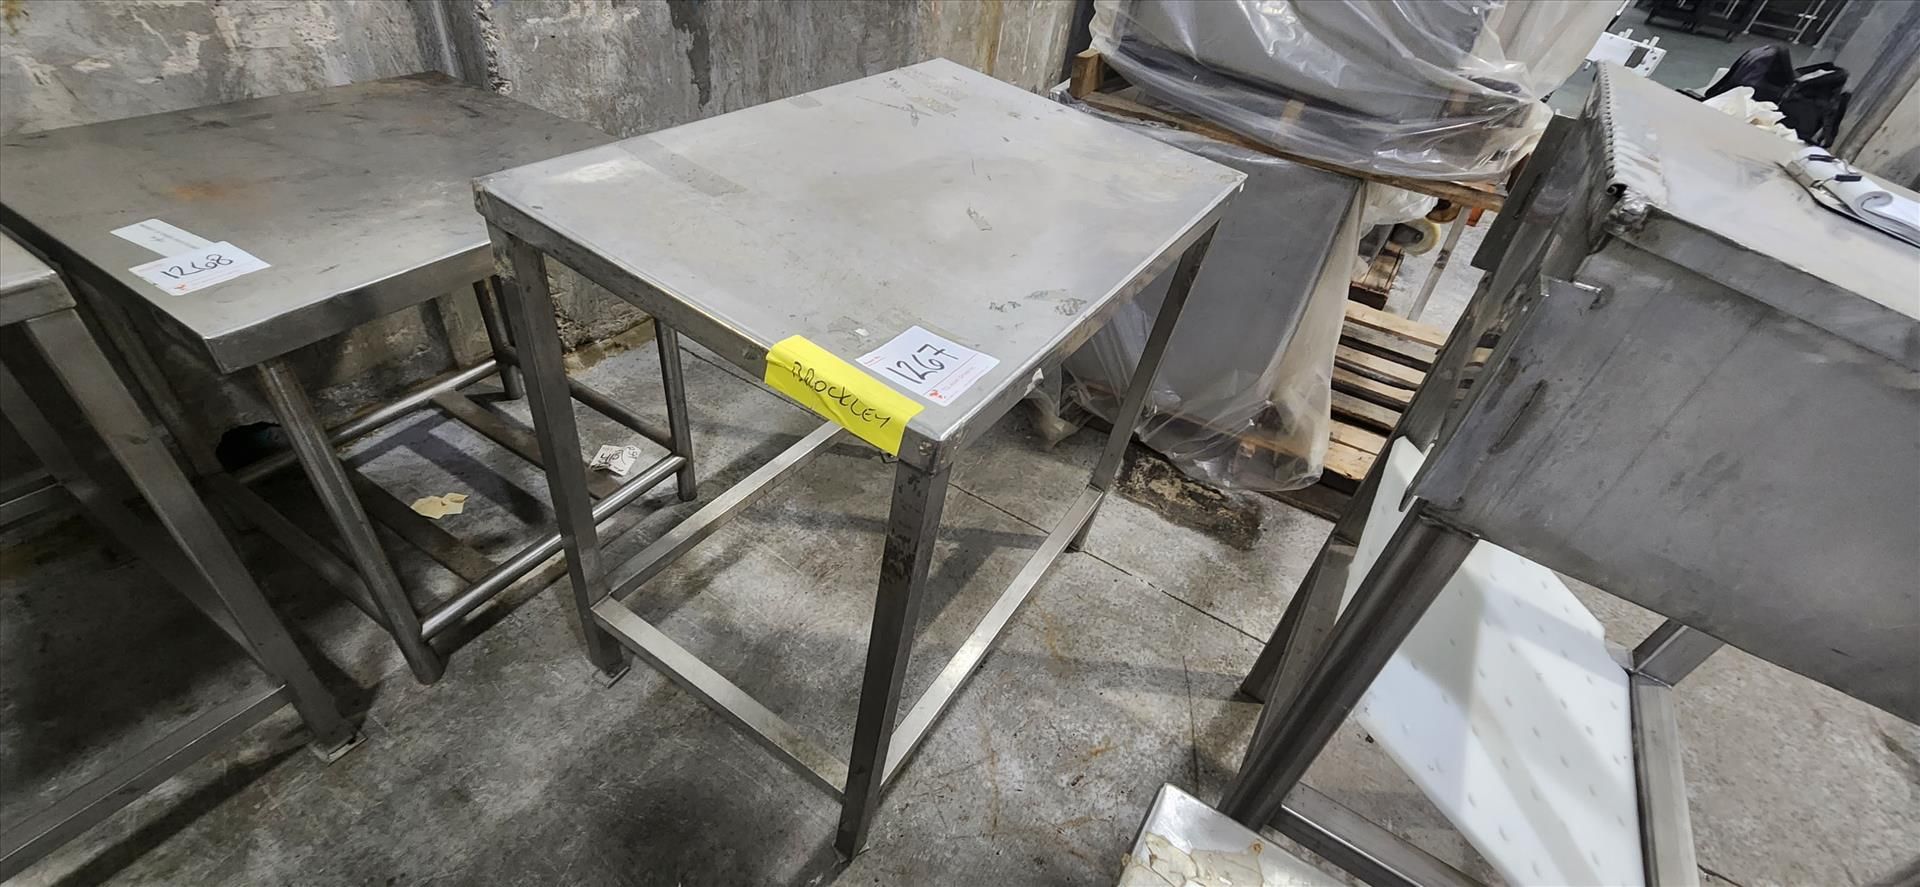 table, stainless steel, approx. 24 in. x 36 in. [TAG 1267 - LOC Brockley Dr.]